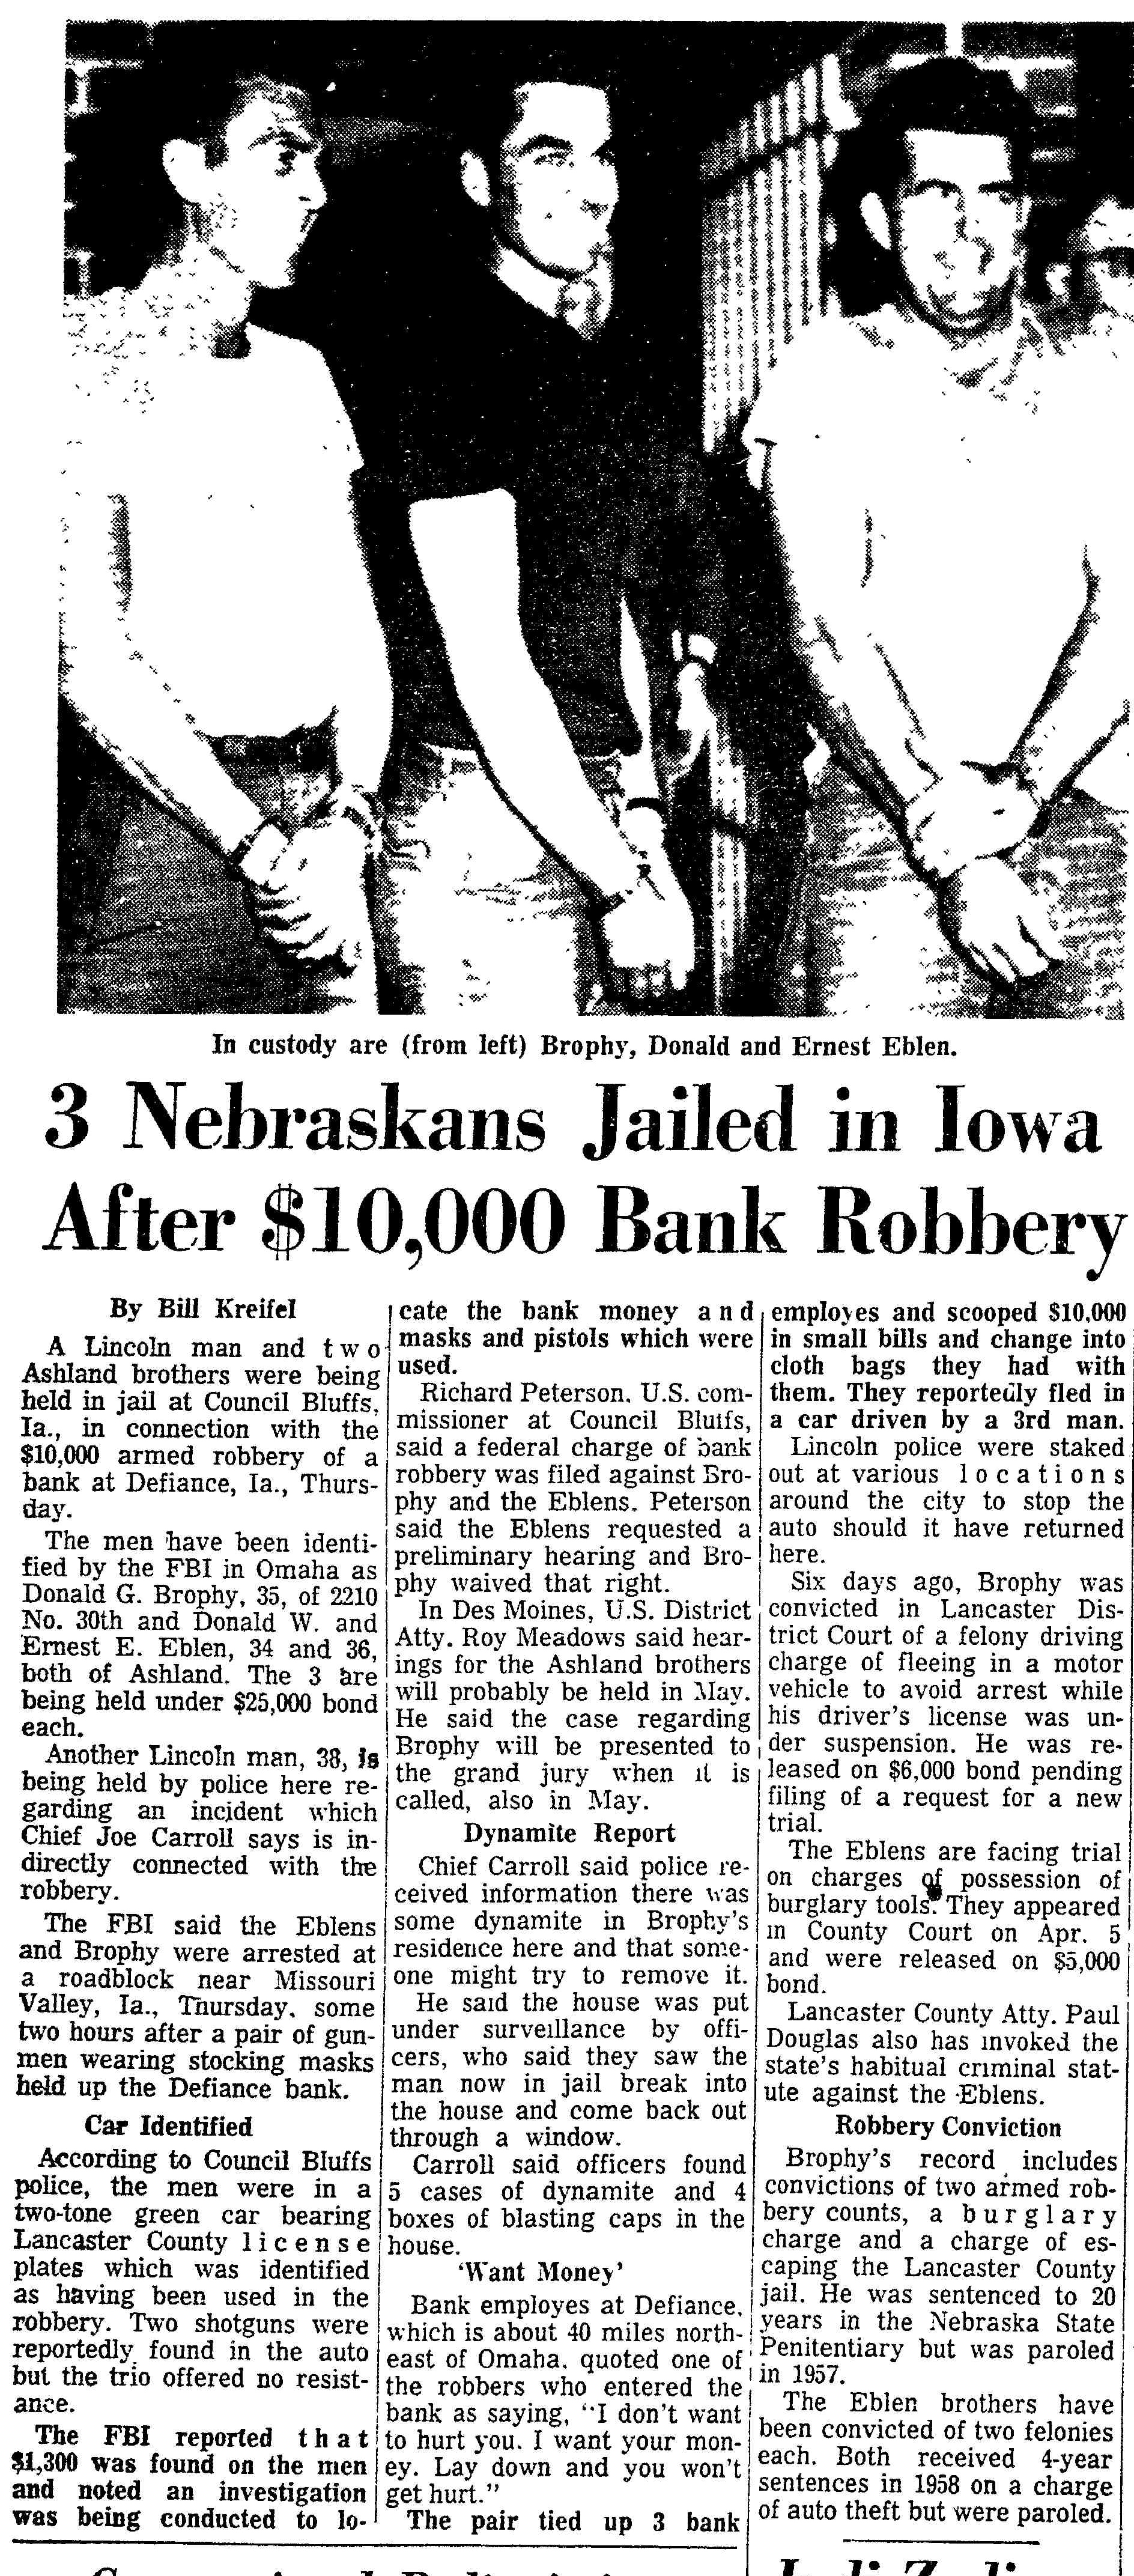 Newspaper clipping with headline '3 Nebraskans Jailed in Iowa After $10,000 Bank Robbery'